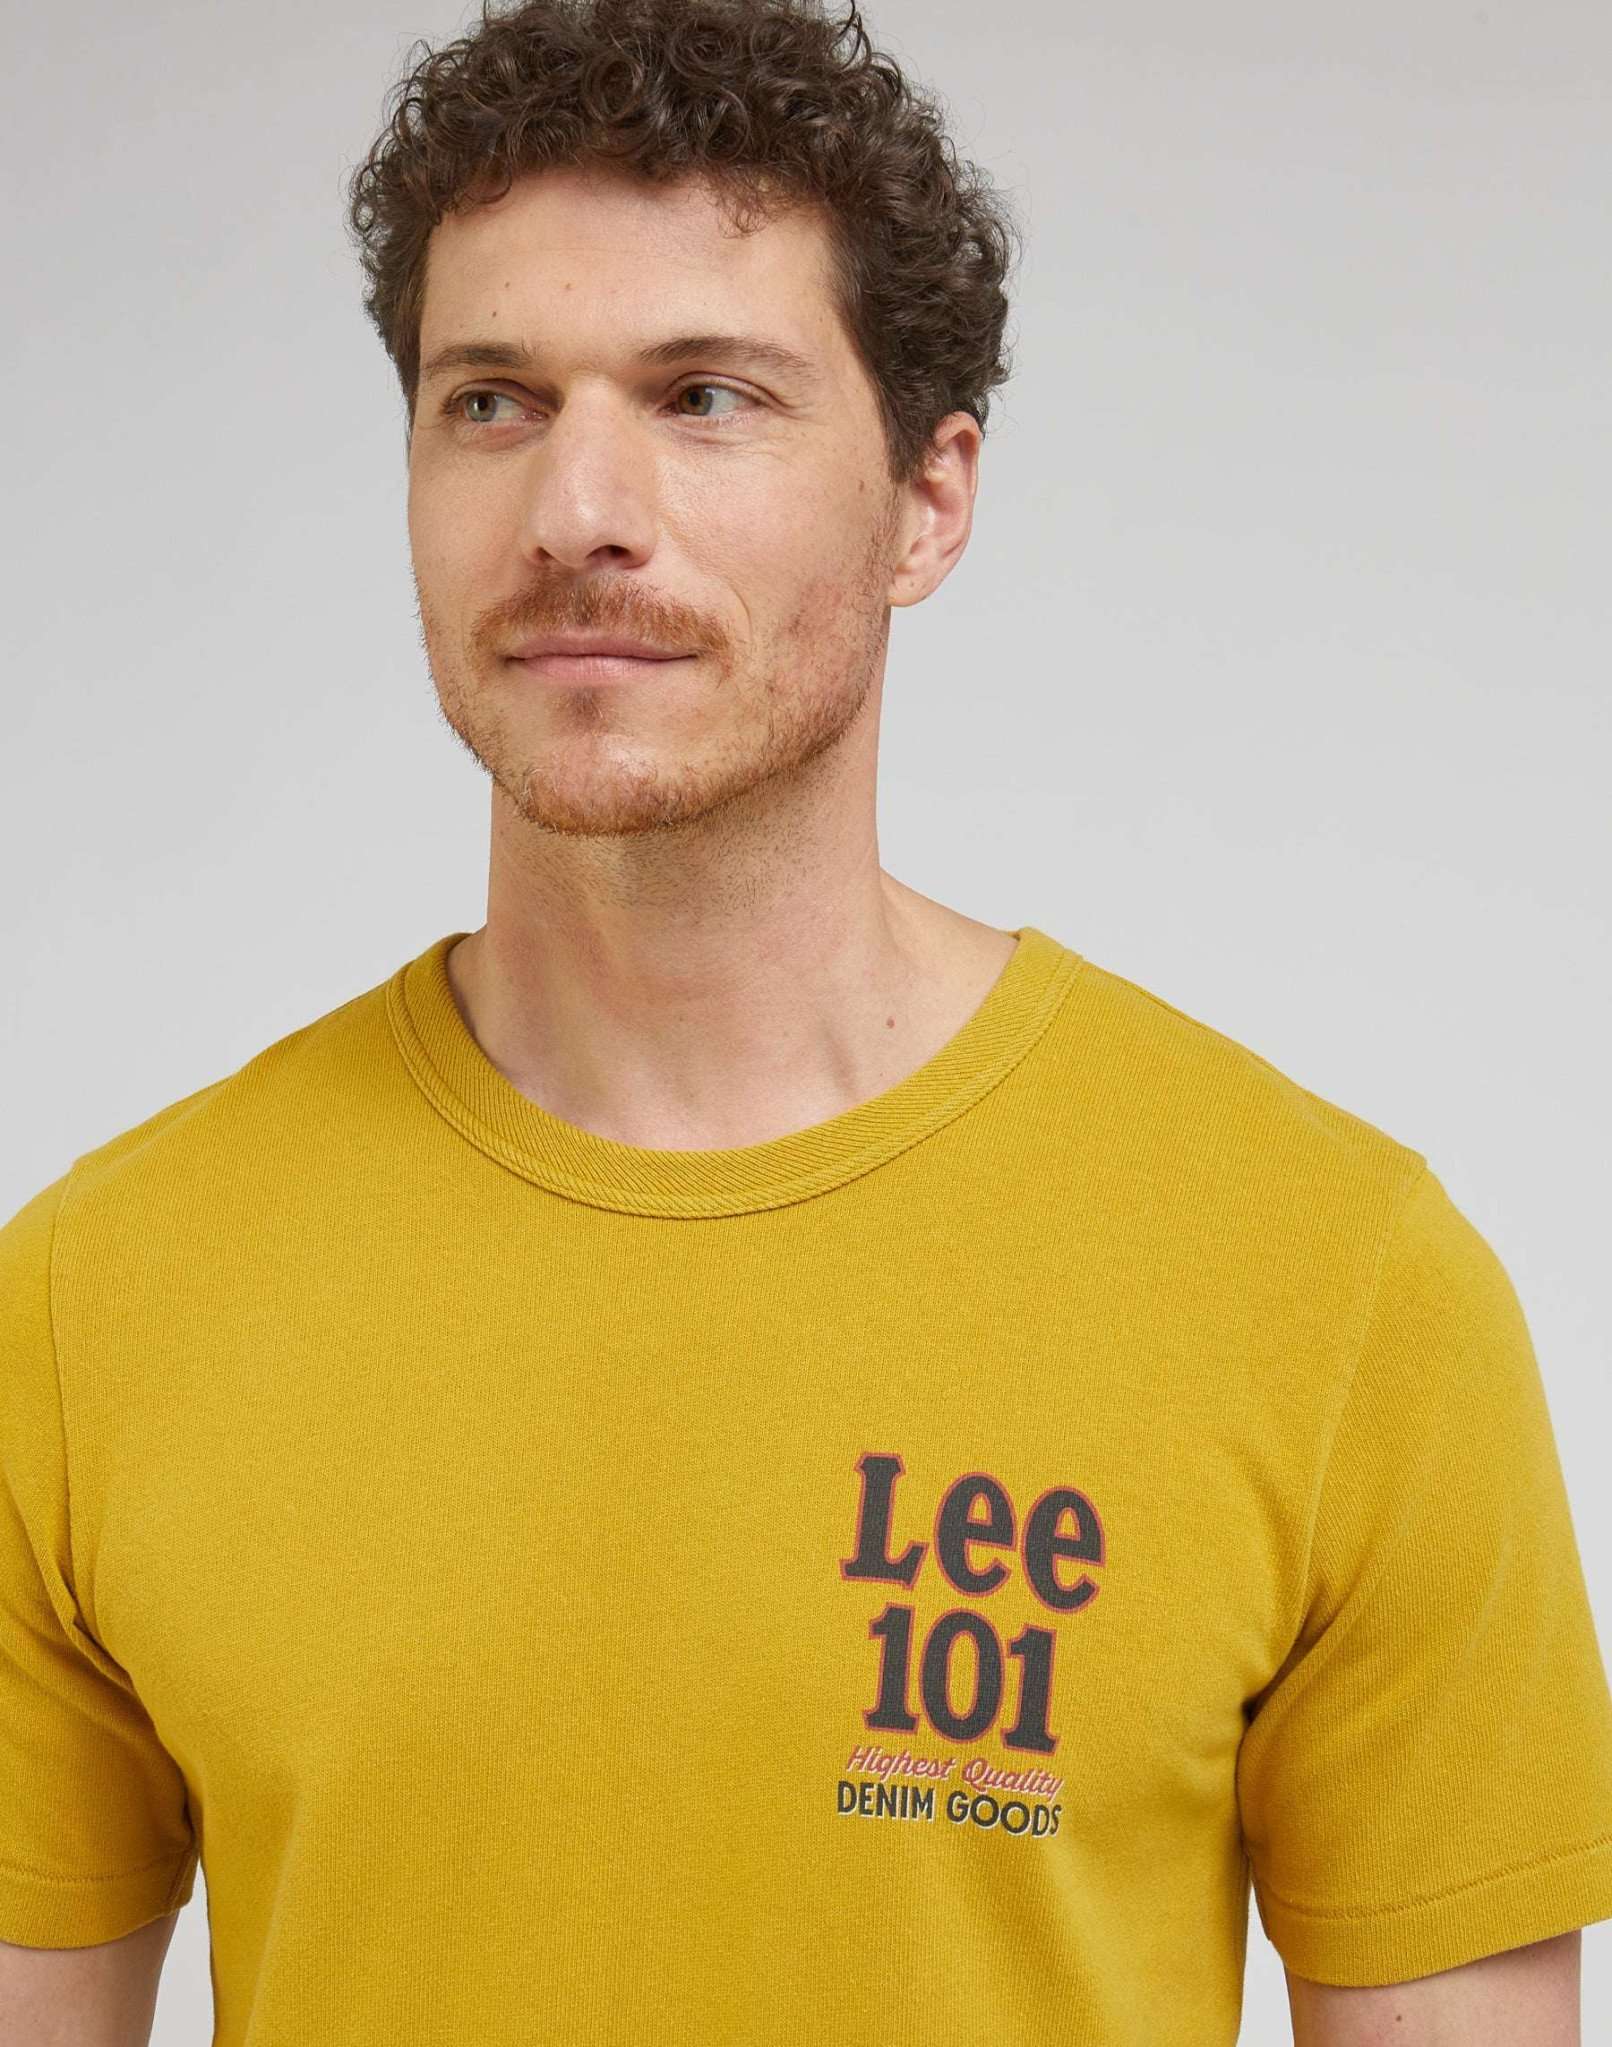 101 Core Tee in Maize T-Shirts Lee   